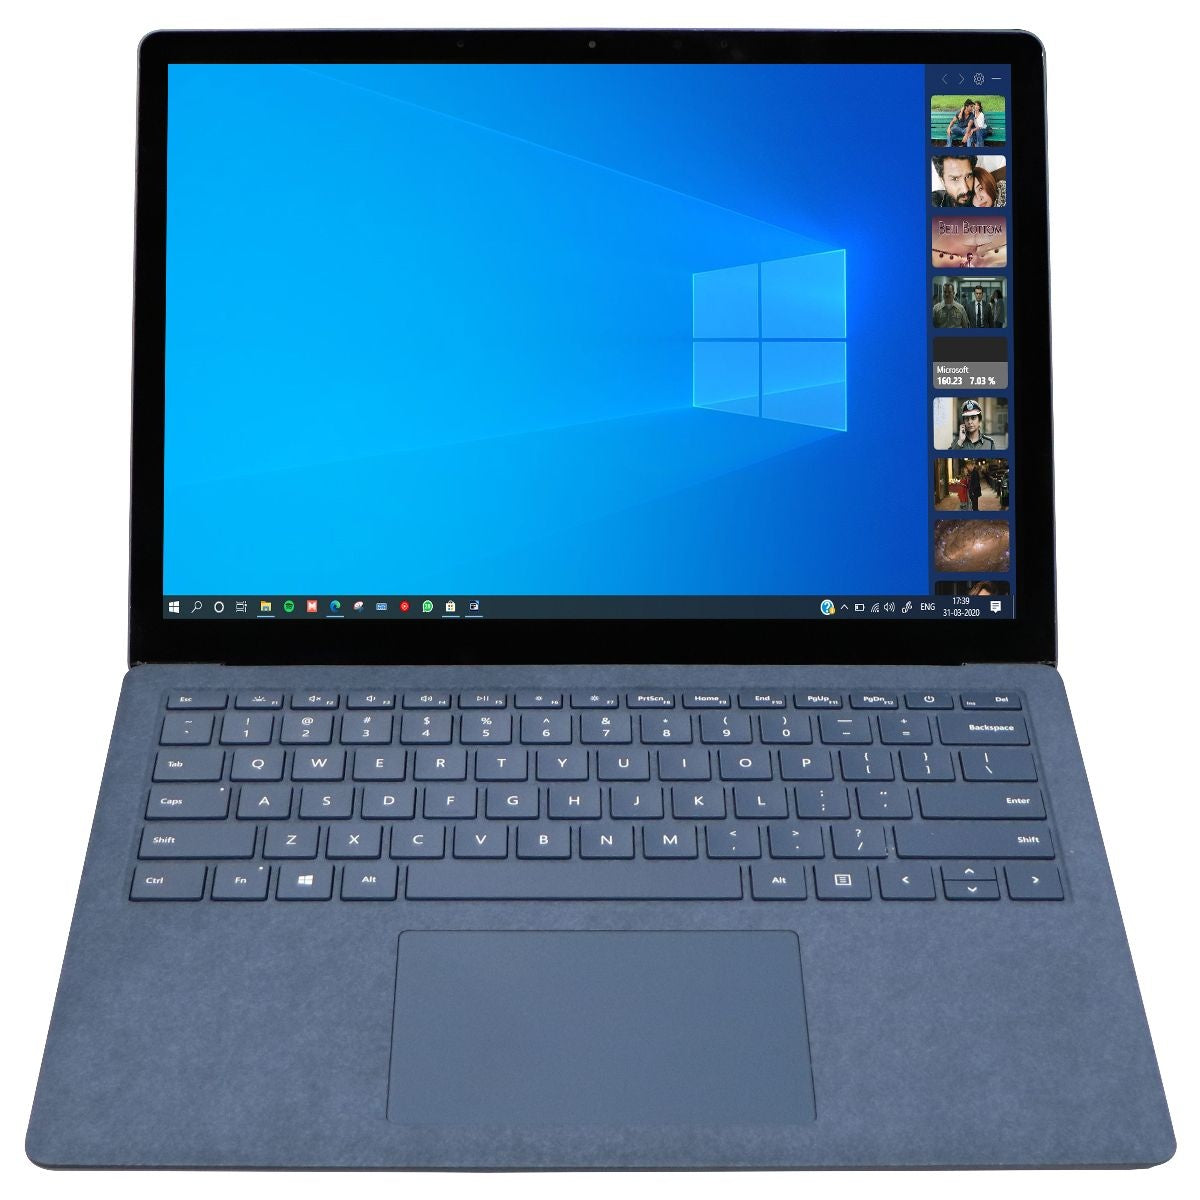 Microsoft Surface Laptop 3 (13.5-in) Intel i5-1035G7 / 8GB/256GB SSD - Blue Laptops - PC Laptops & Netbooks Microsoft    - Simple Cell Bulk Wholesale Pricing - USA Seller